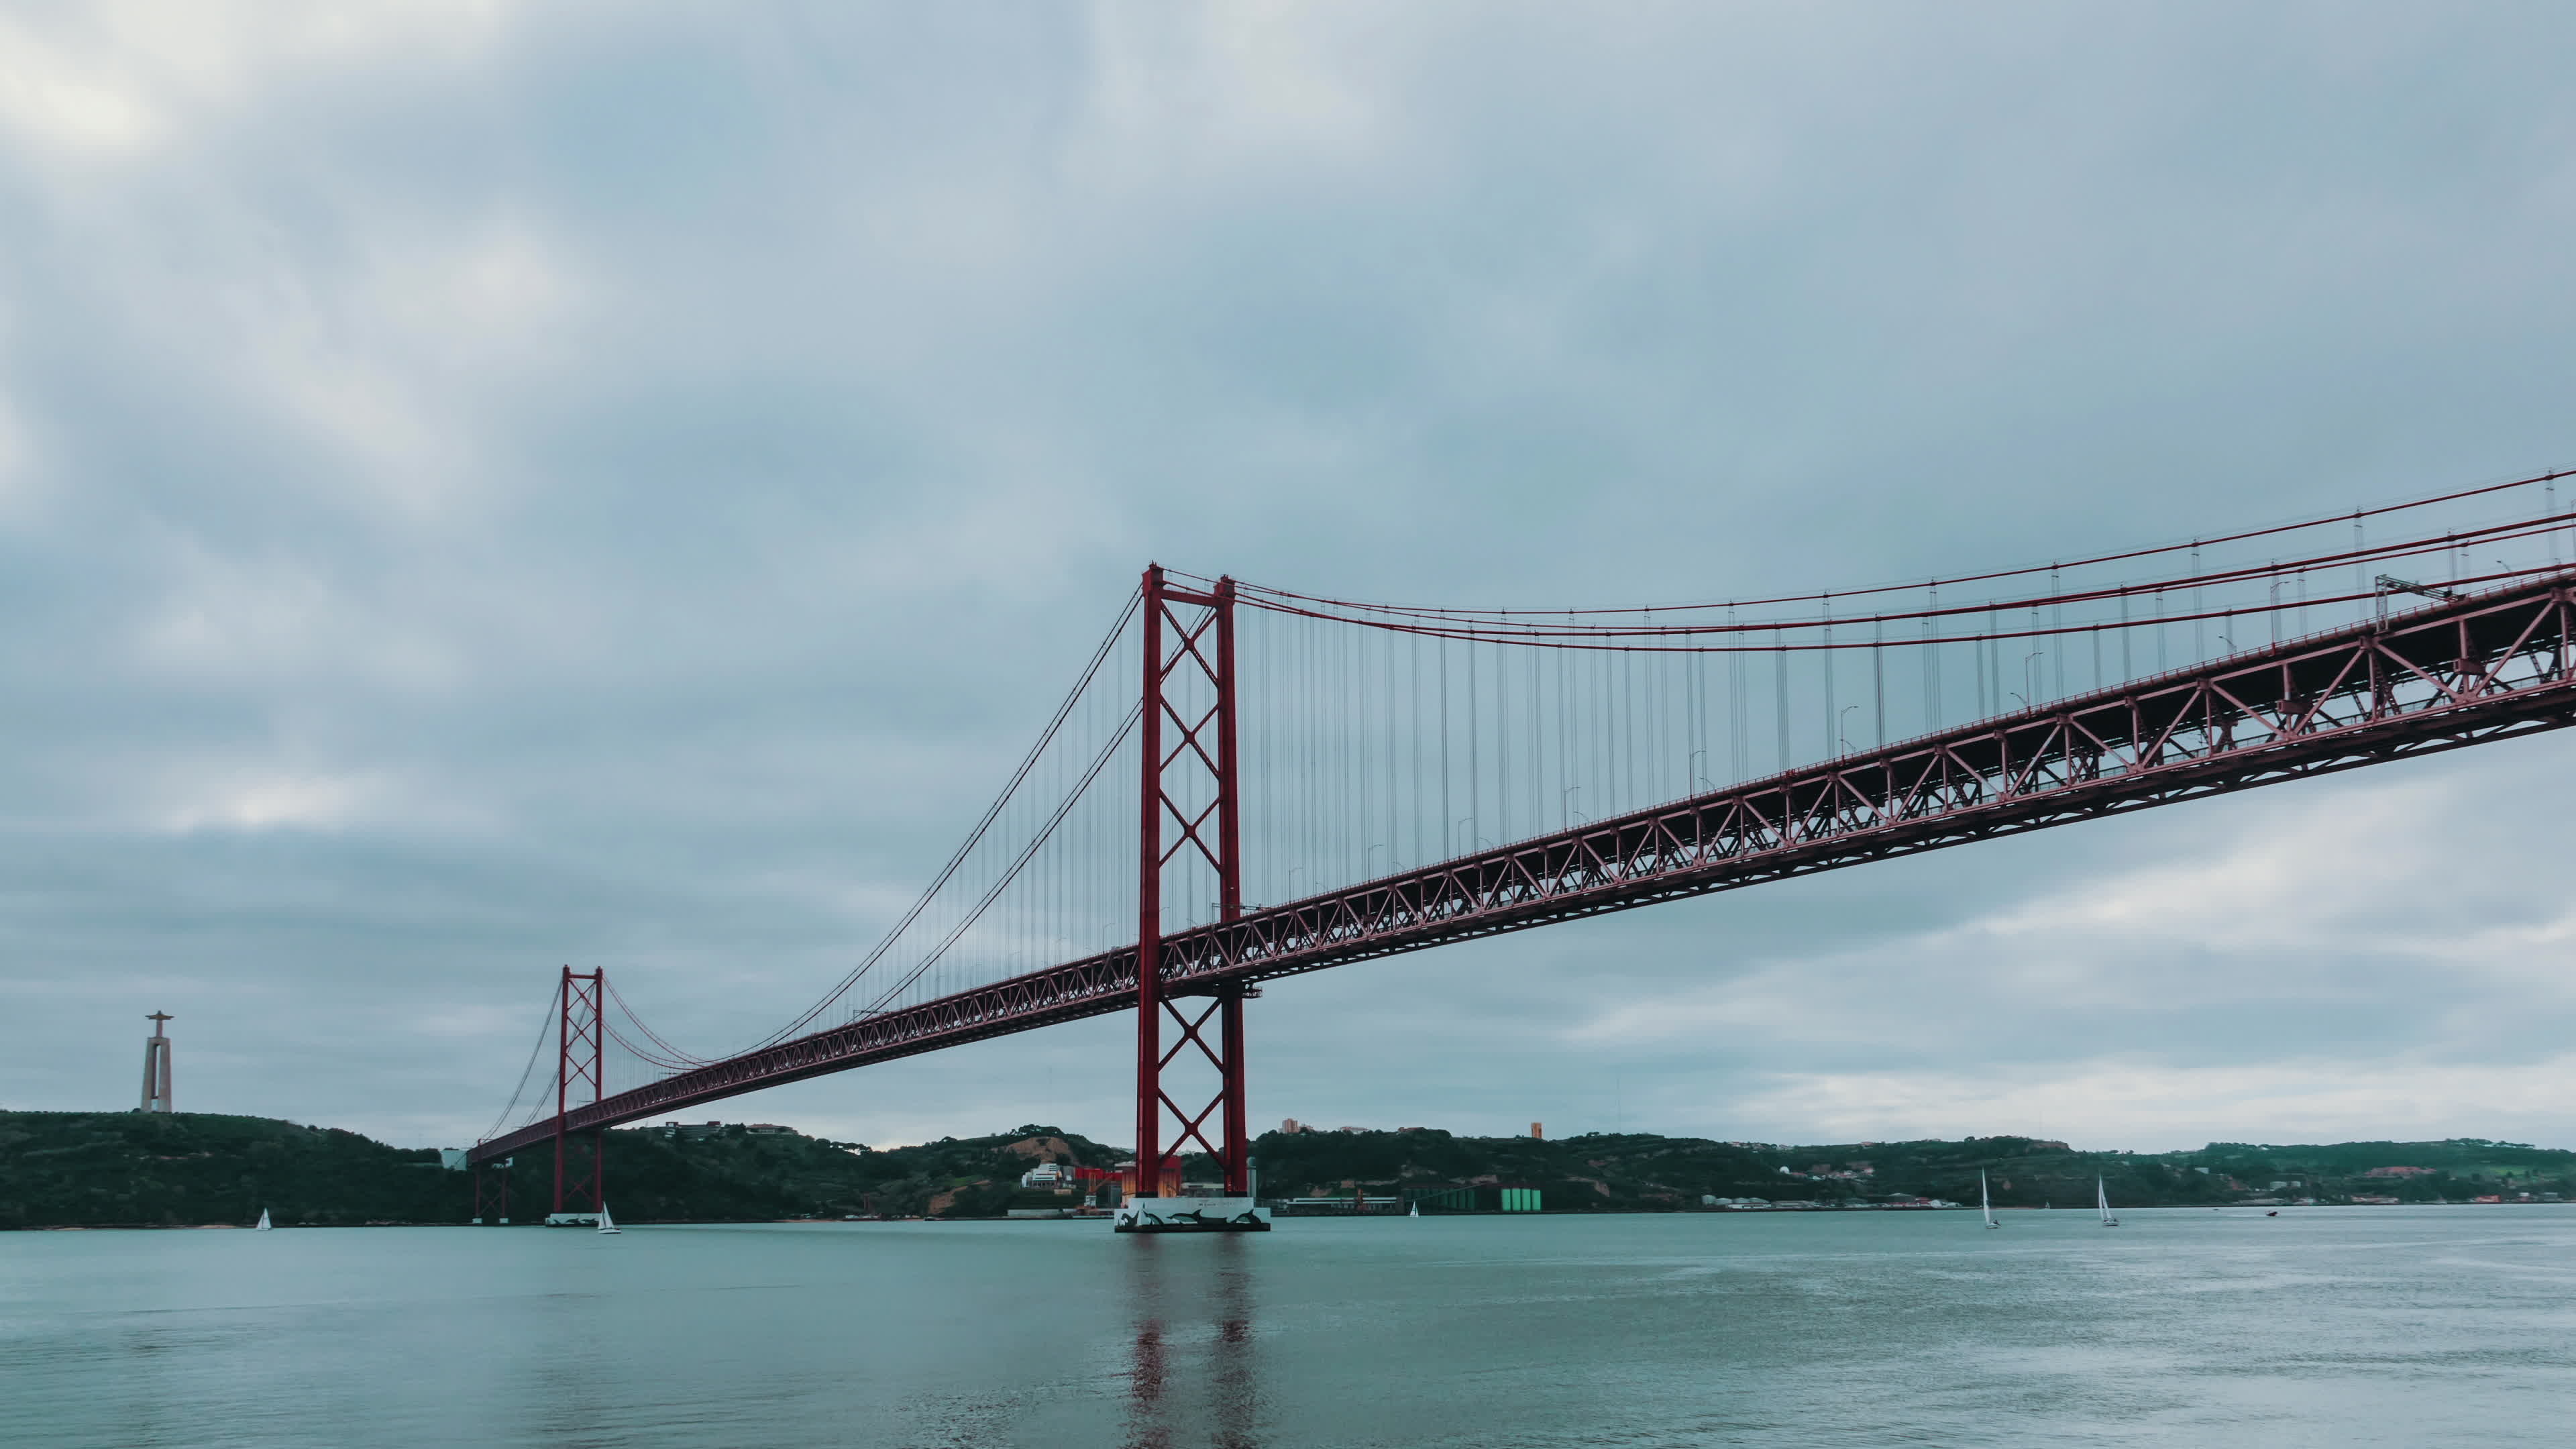 Bridge: Ponte 25 de Abril, The city of Lisbon connected to the municipality of Almada, Tagus river, Portugal. 3840x2160 4K Wallpaper.